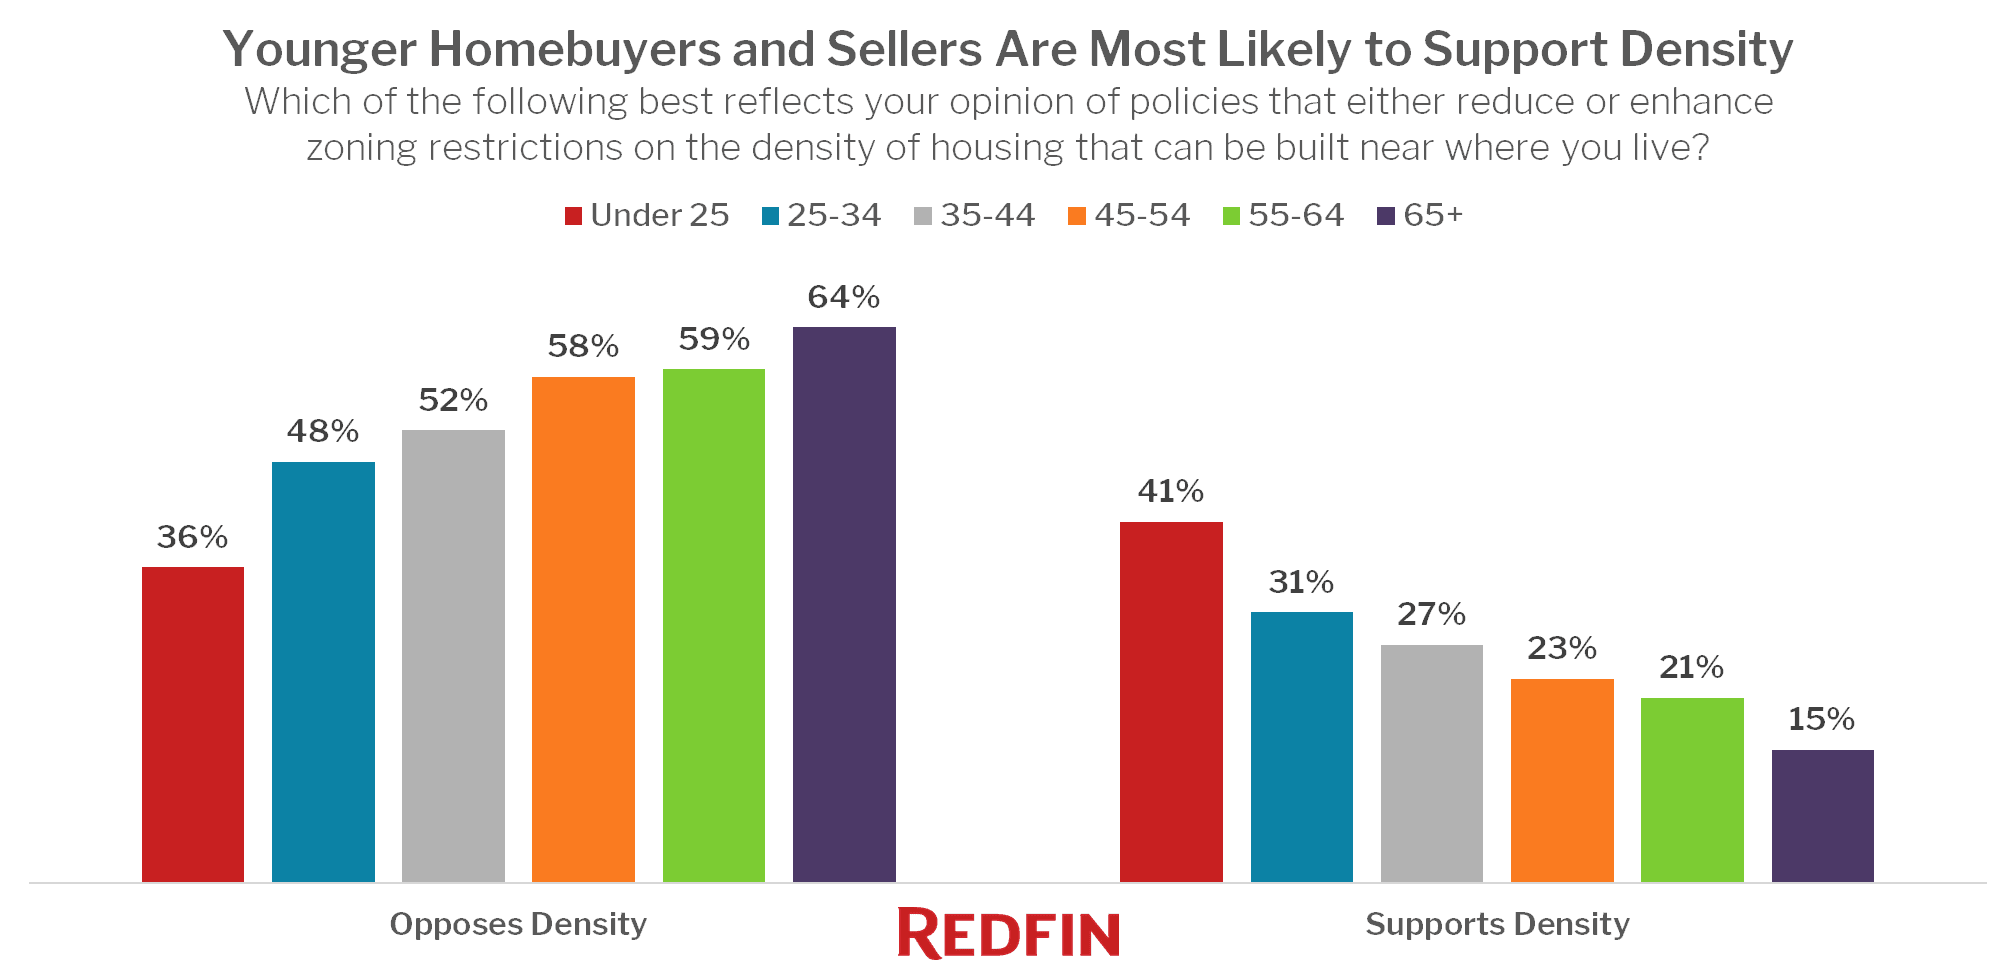 Younger Homebuyers and Sellers Are Most Likely to Support Density